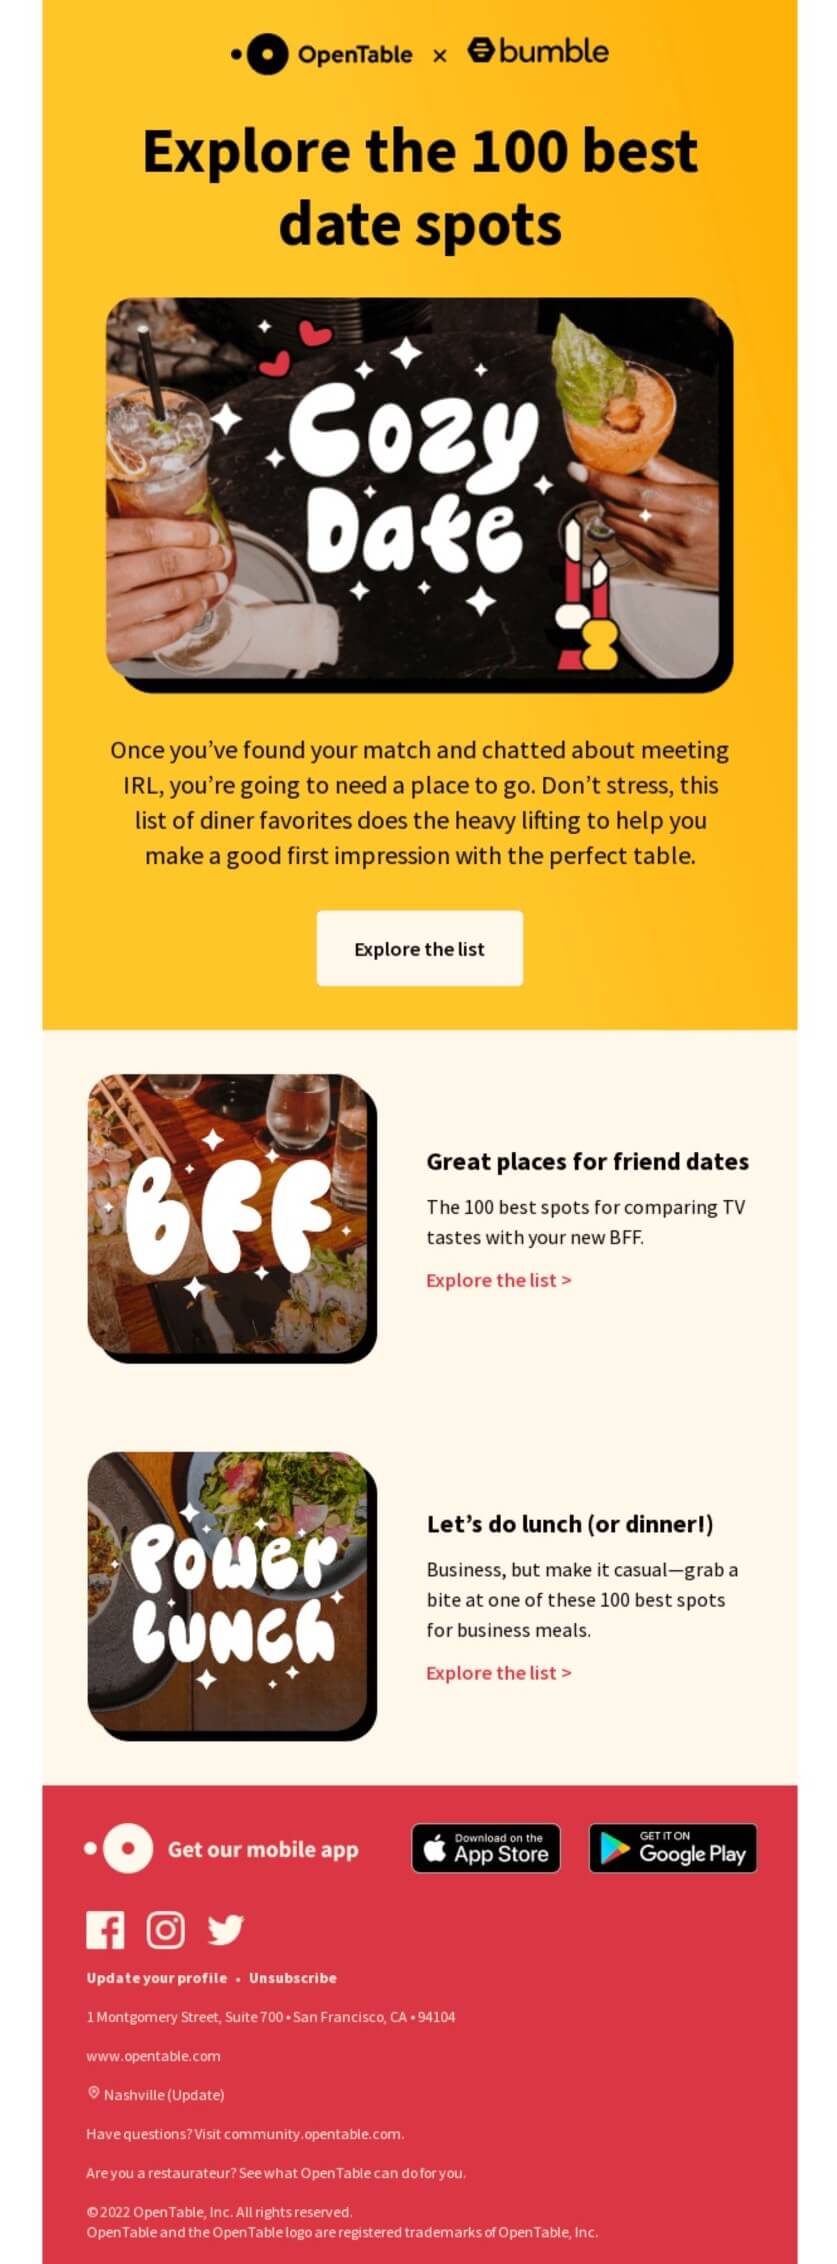 An email from OpenTable